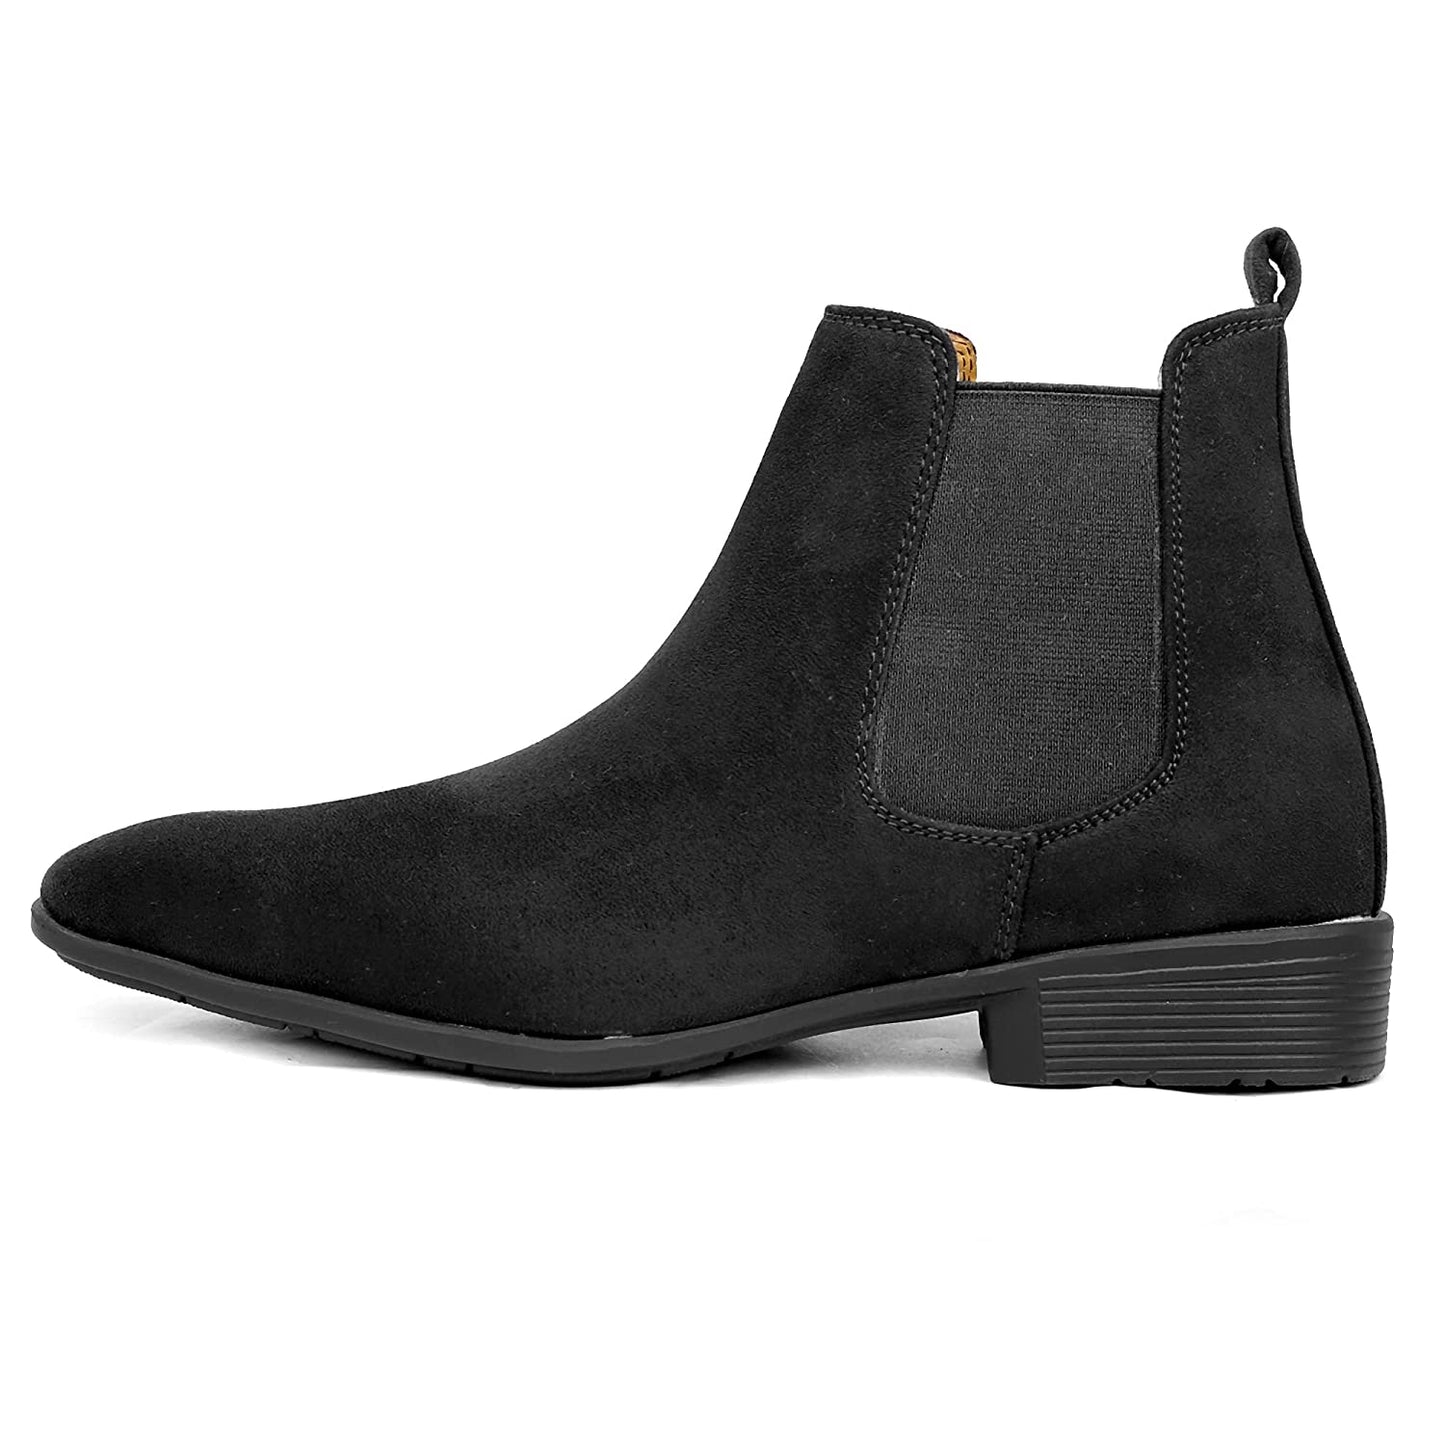 New Arrival Latest Suede Material Black Casual Chelsea Boots For Men-JonasParamount